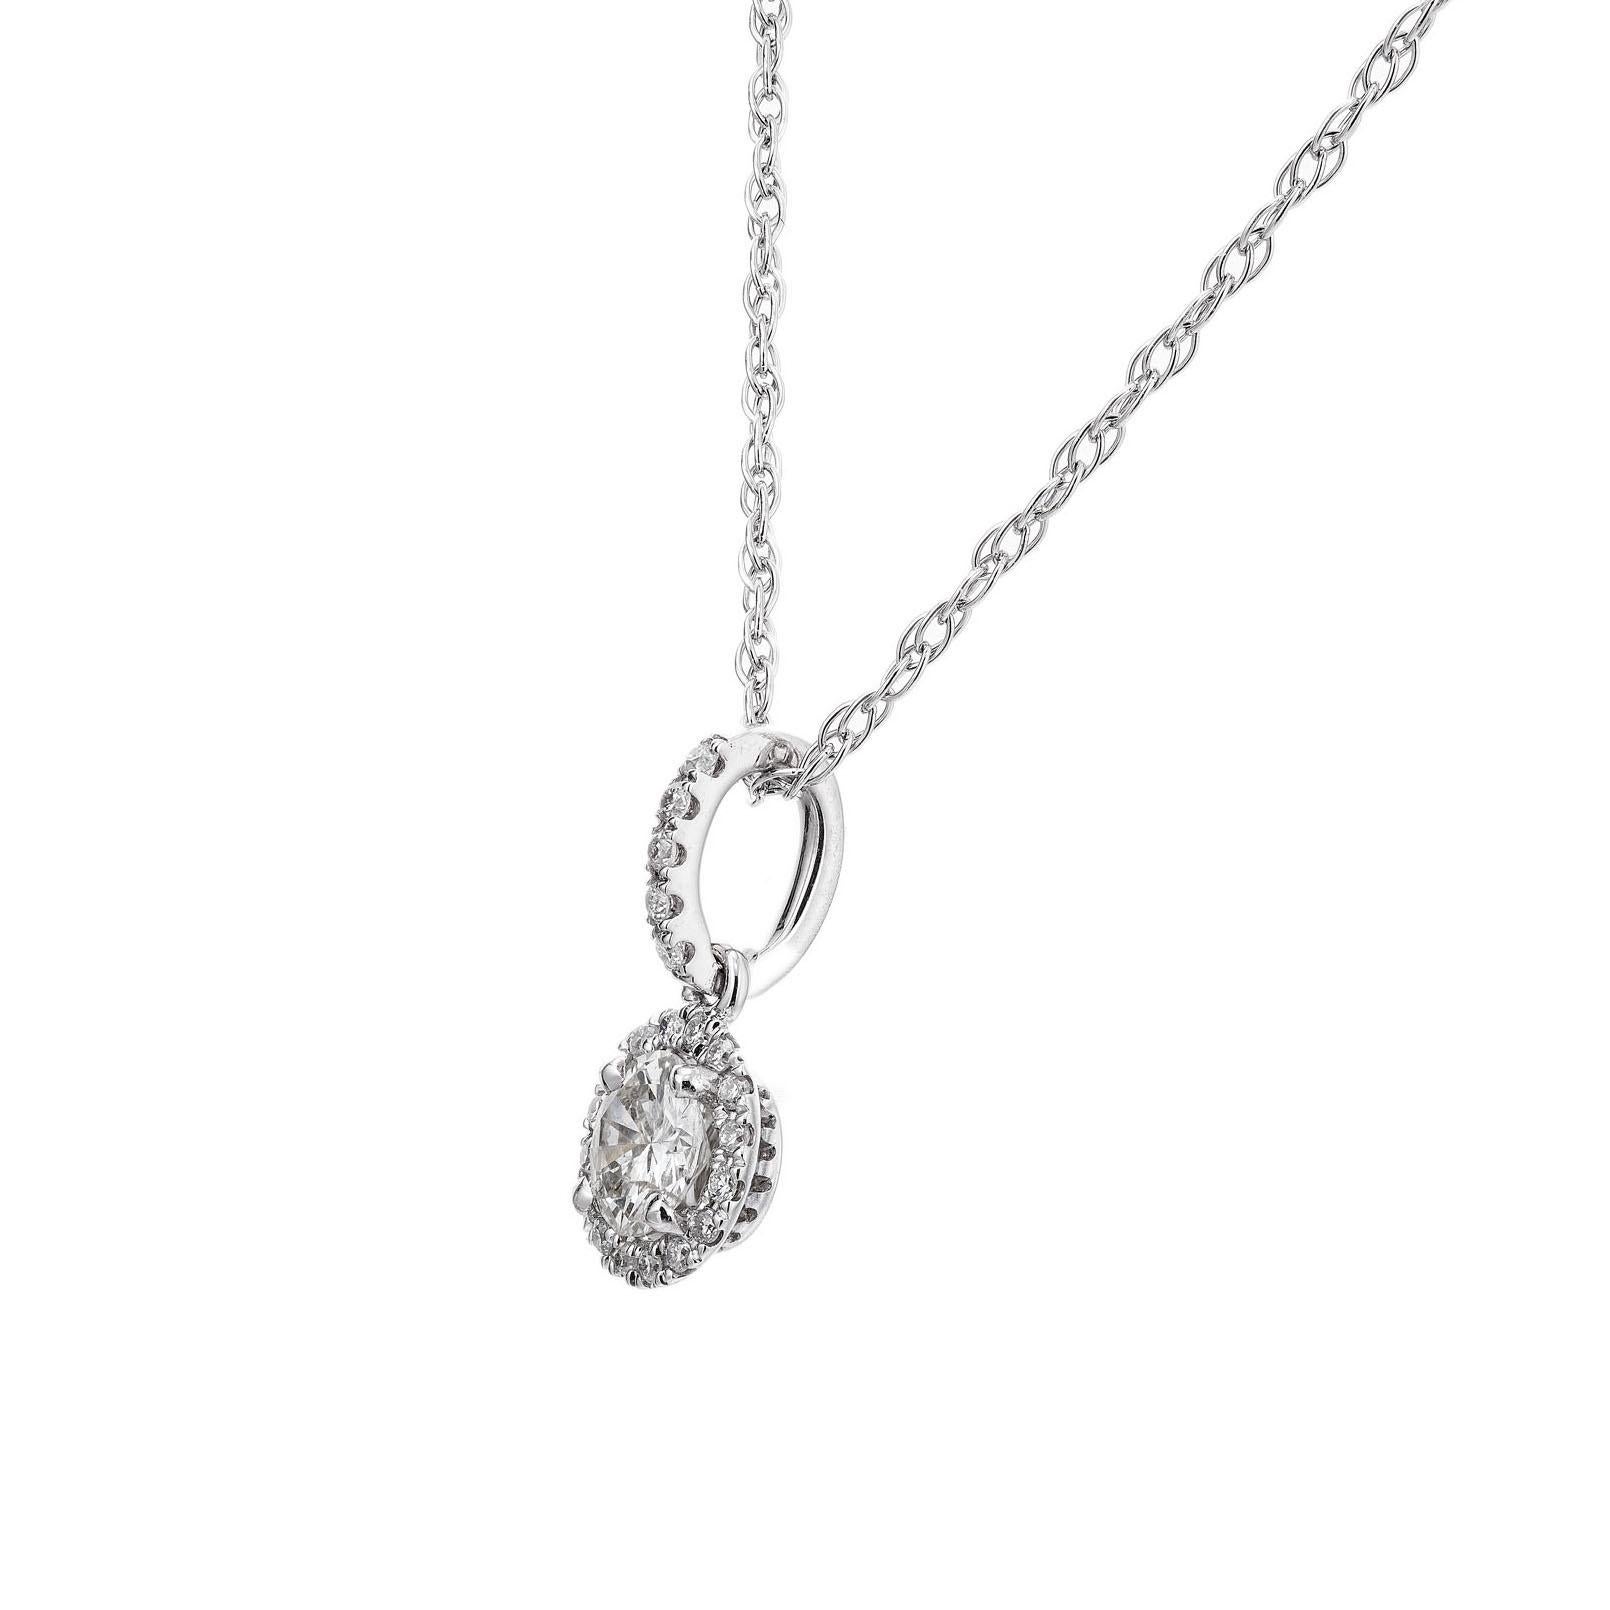 Diamond pendant necklace. .21ct center diamond with a halo of 21 round brilliant cut diamonds, in a 14k white gold setting. 16 inch 14k white gold rope chain. Designed and crafted in the Peter Suchy workshop.

1 round brilliant cut diamond, I-J SI2